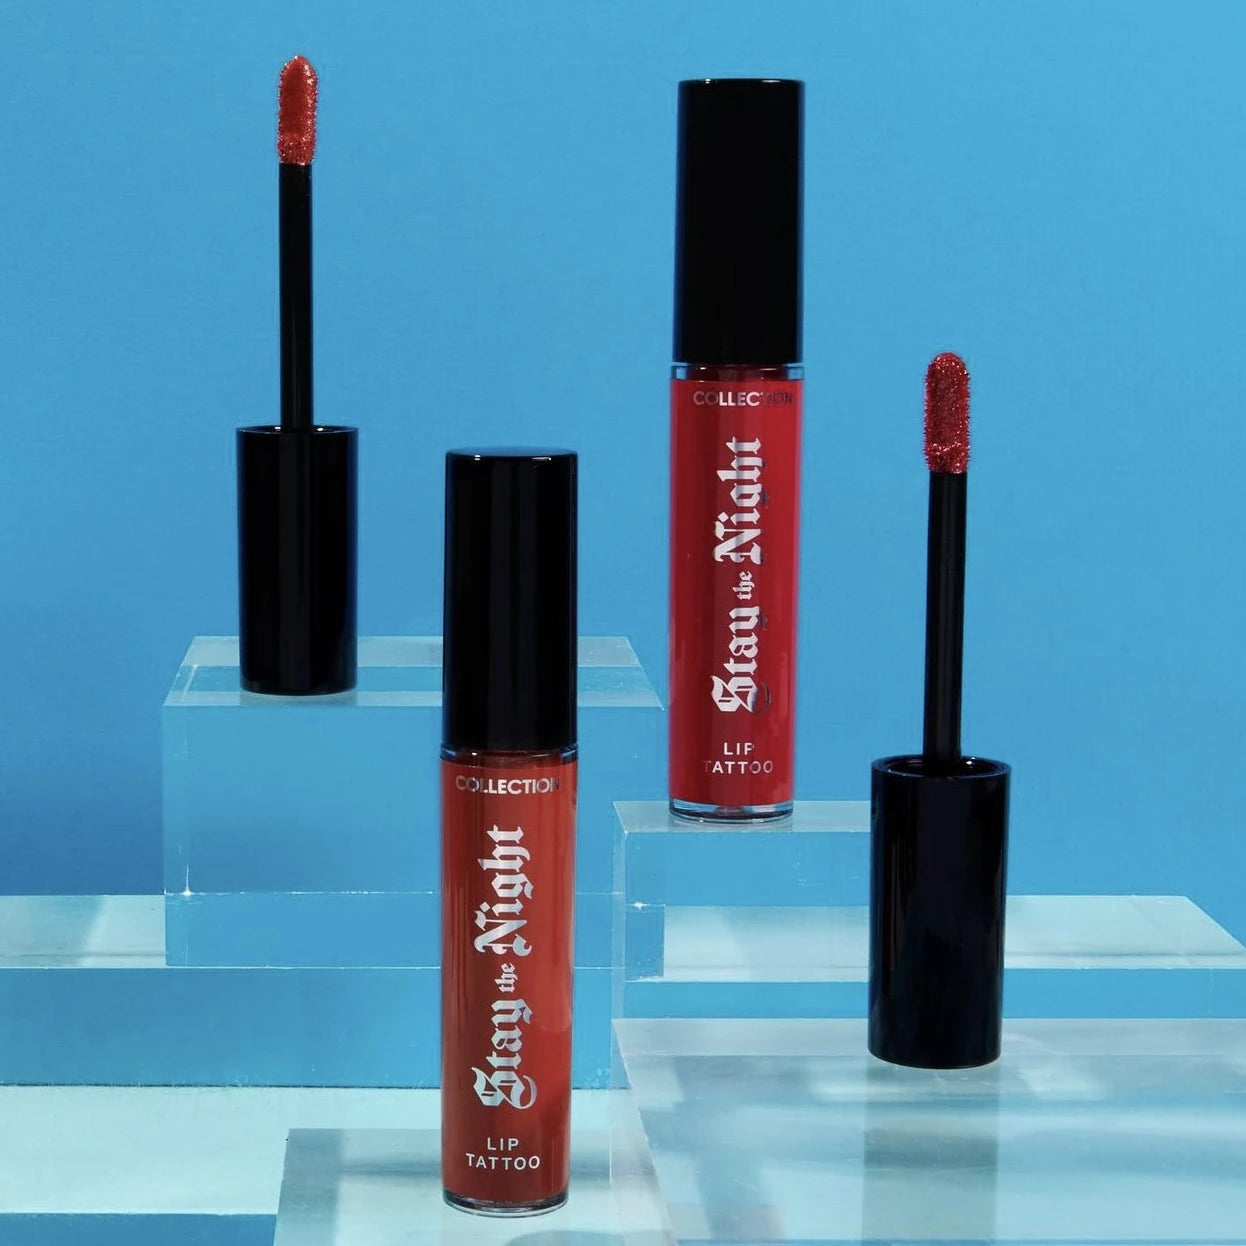 Lip Tattoo Products by collection, a UK Brand